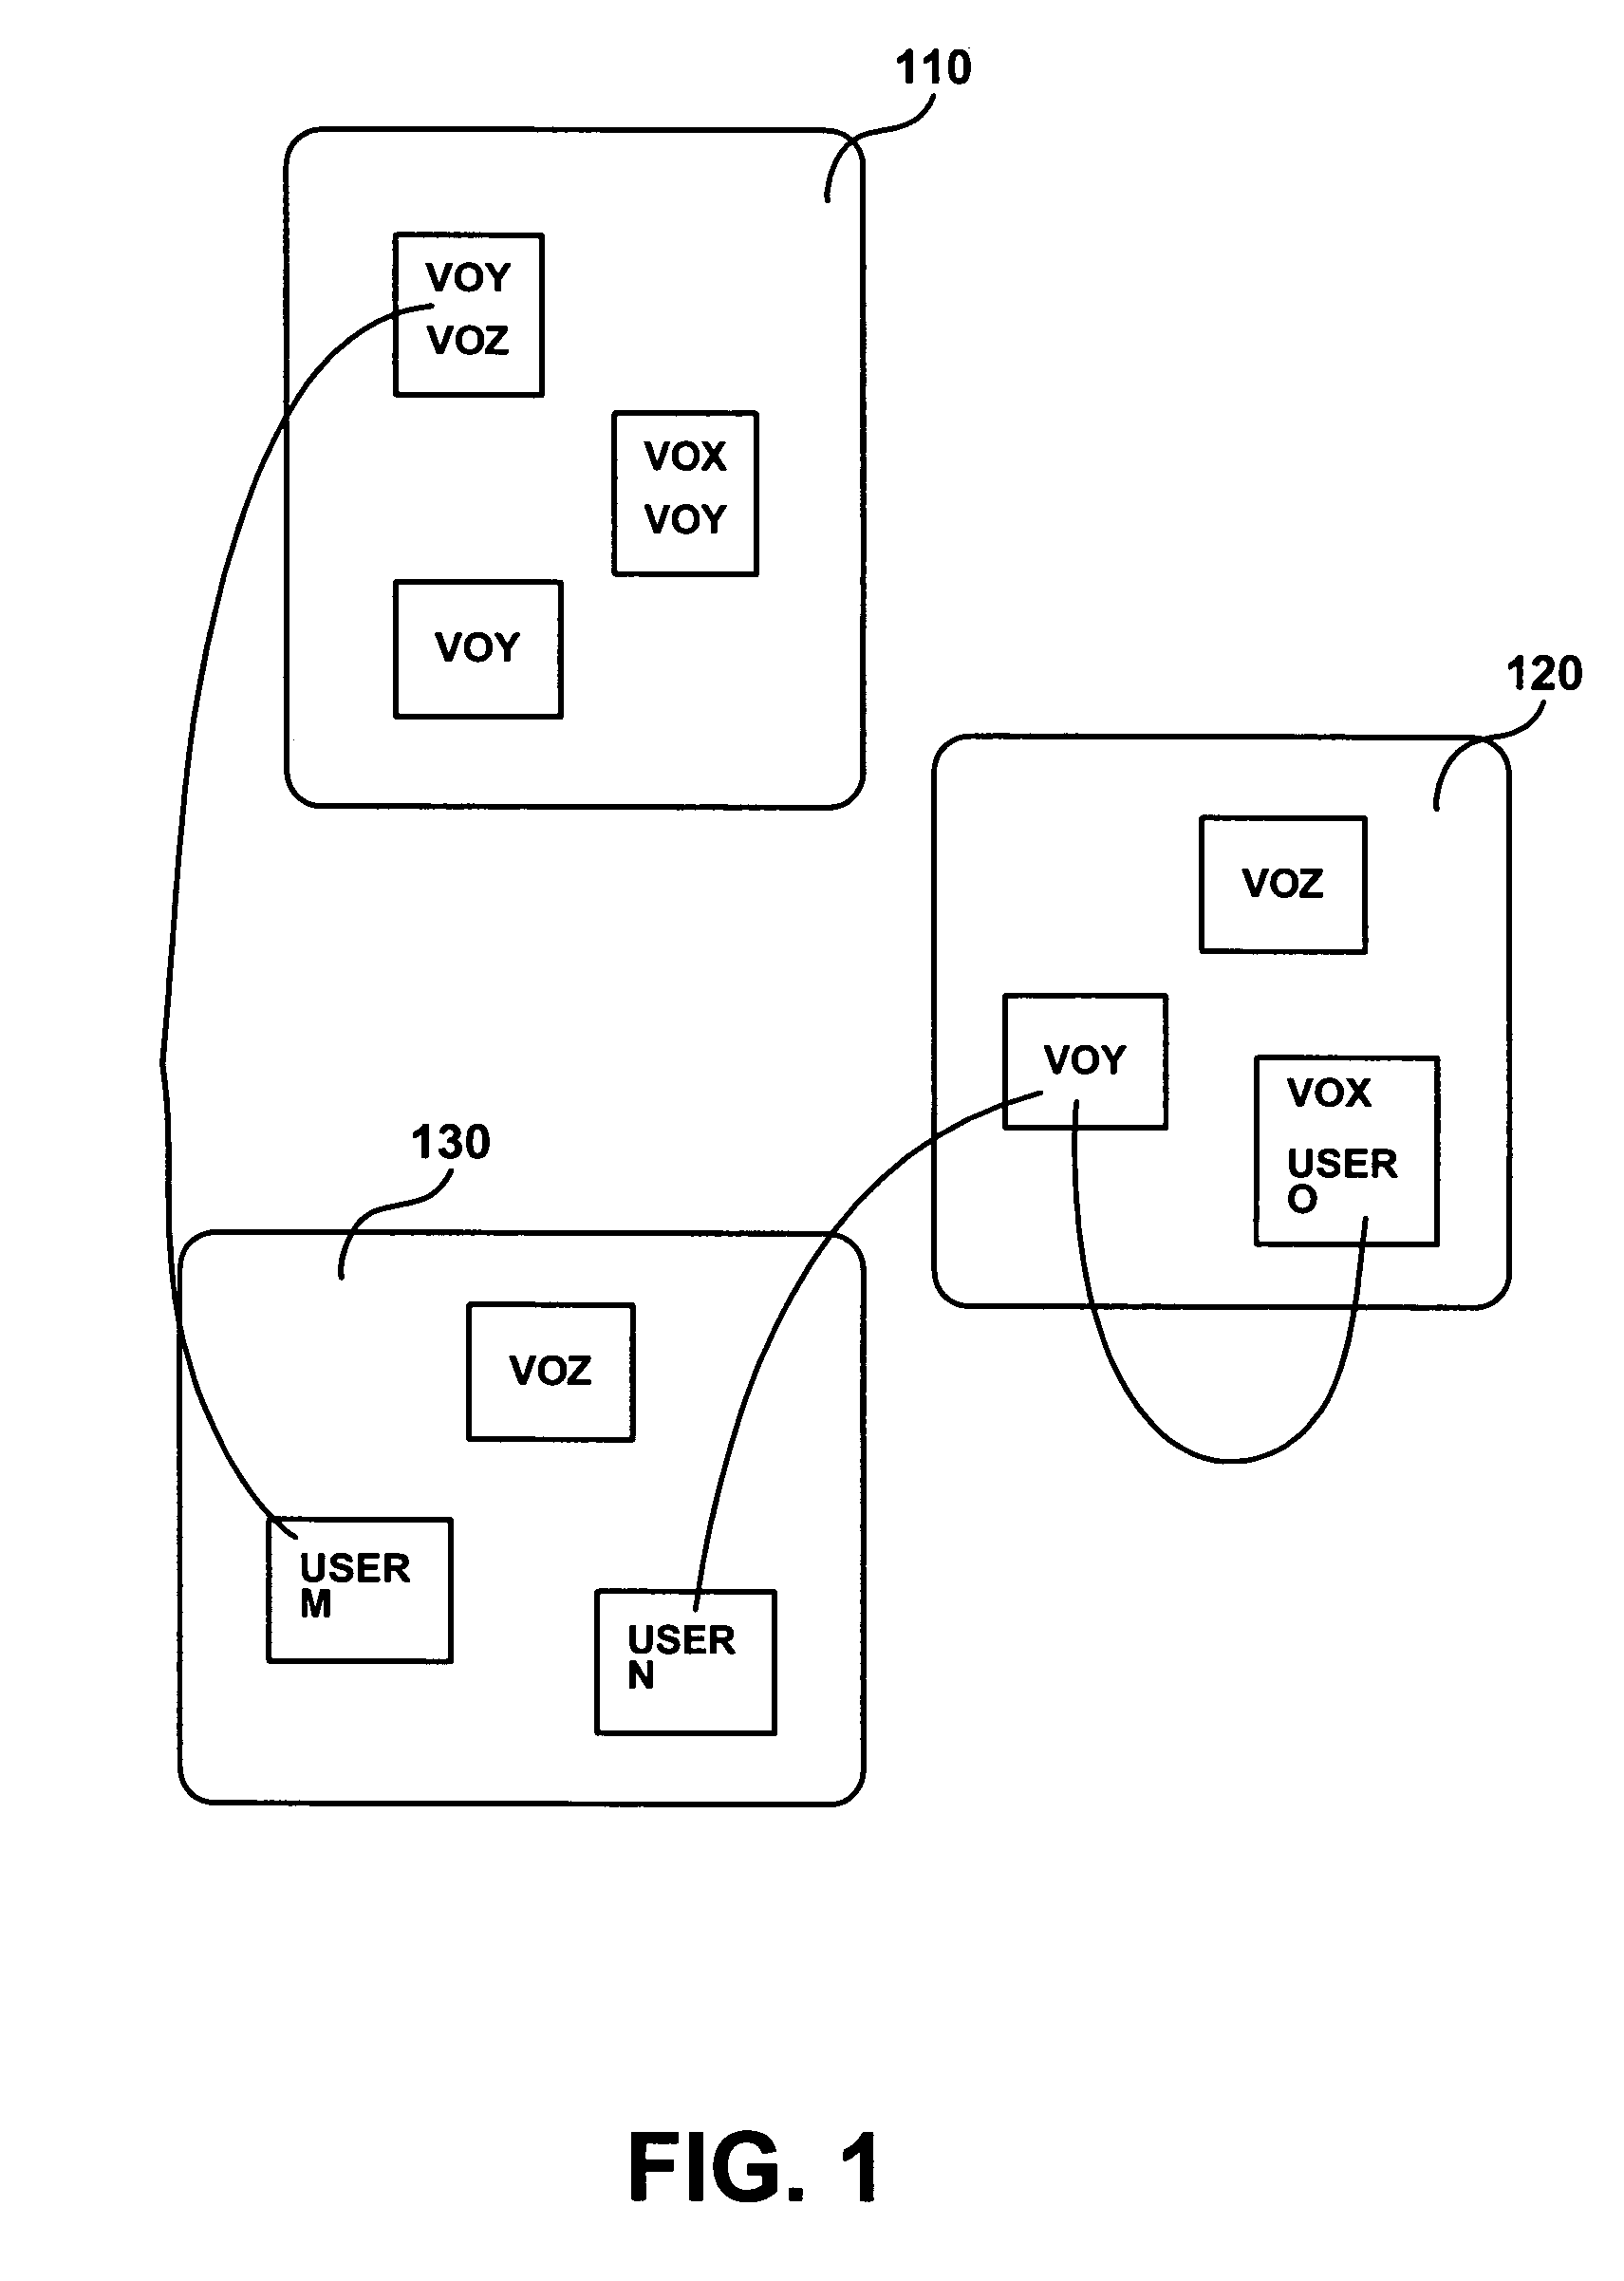 System and method for controlling access in an interactive grid environment